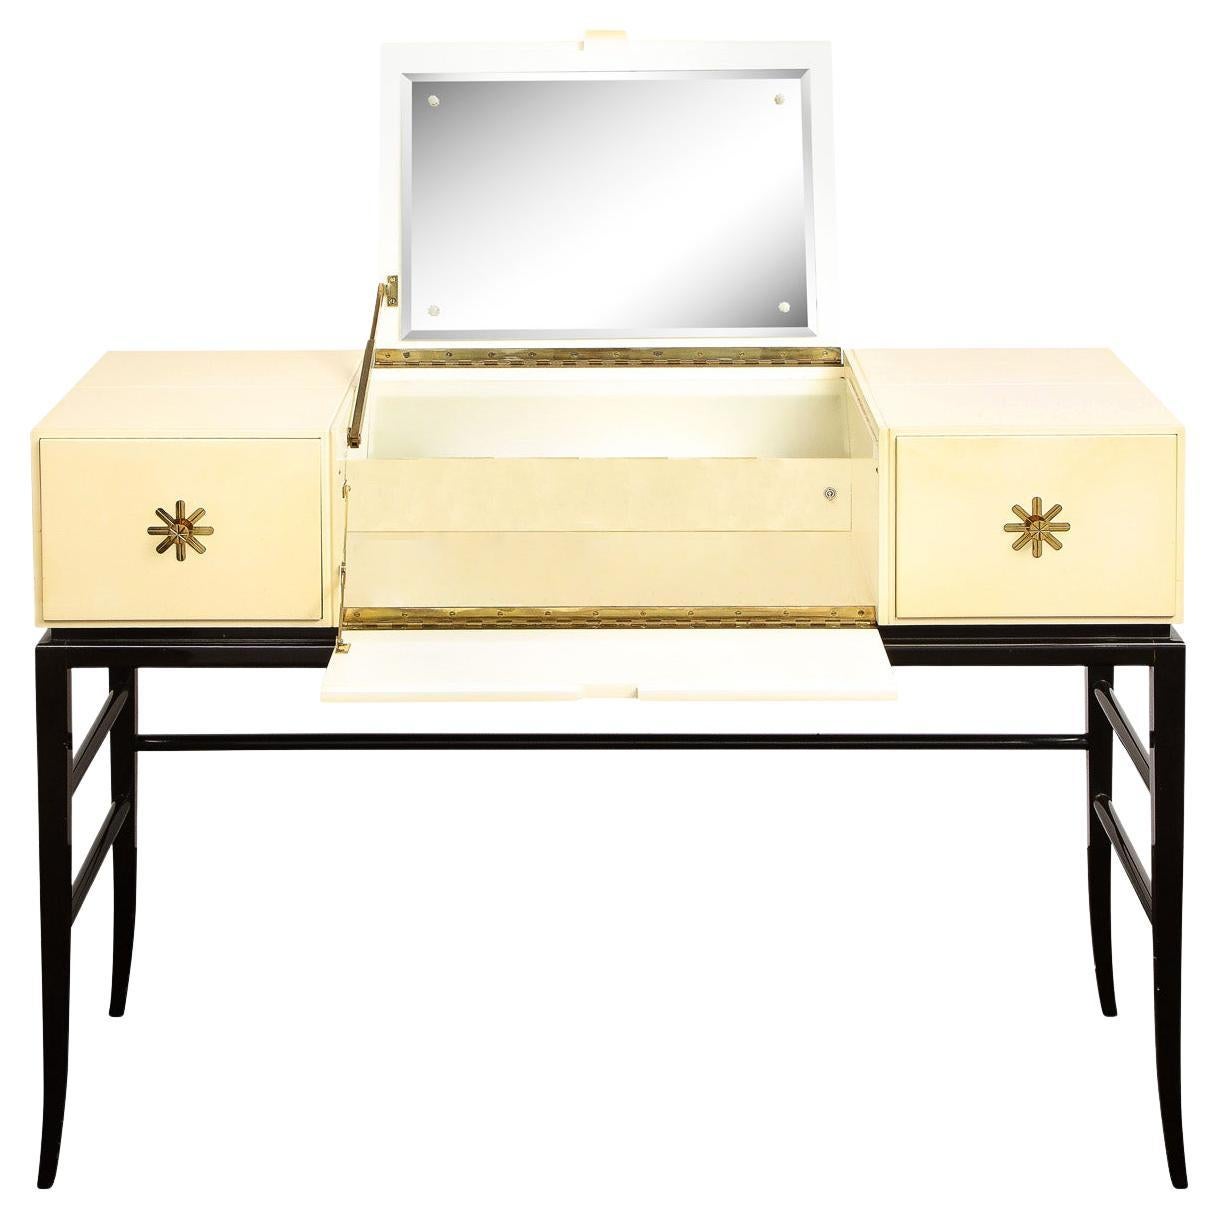 Tommi Parzinger Rare Illuminated Vanity with Iconic Etched Pulls, 1960s